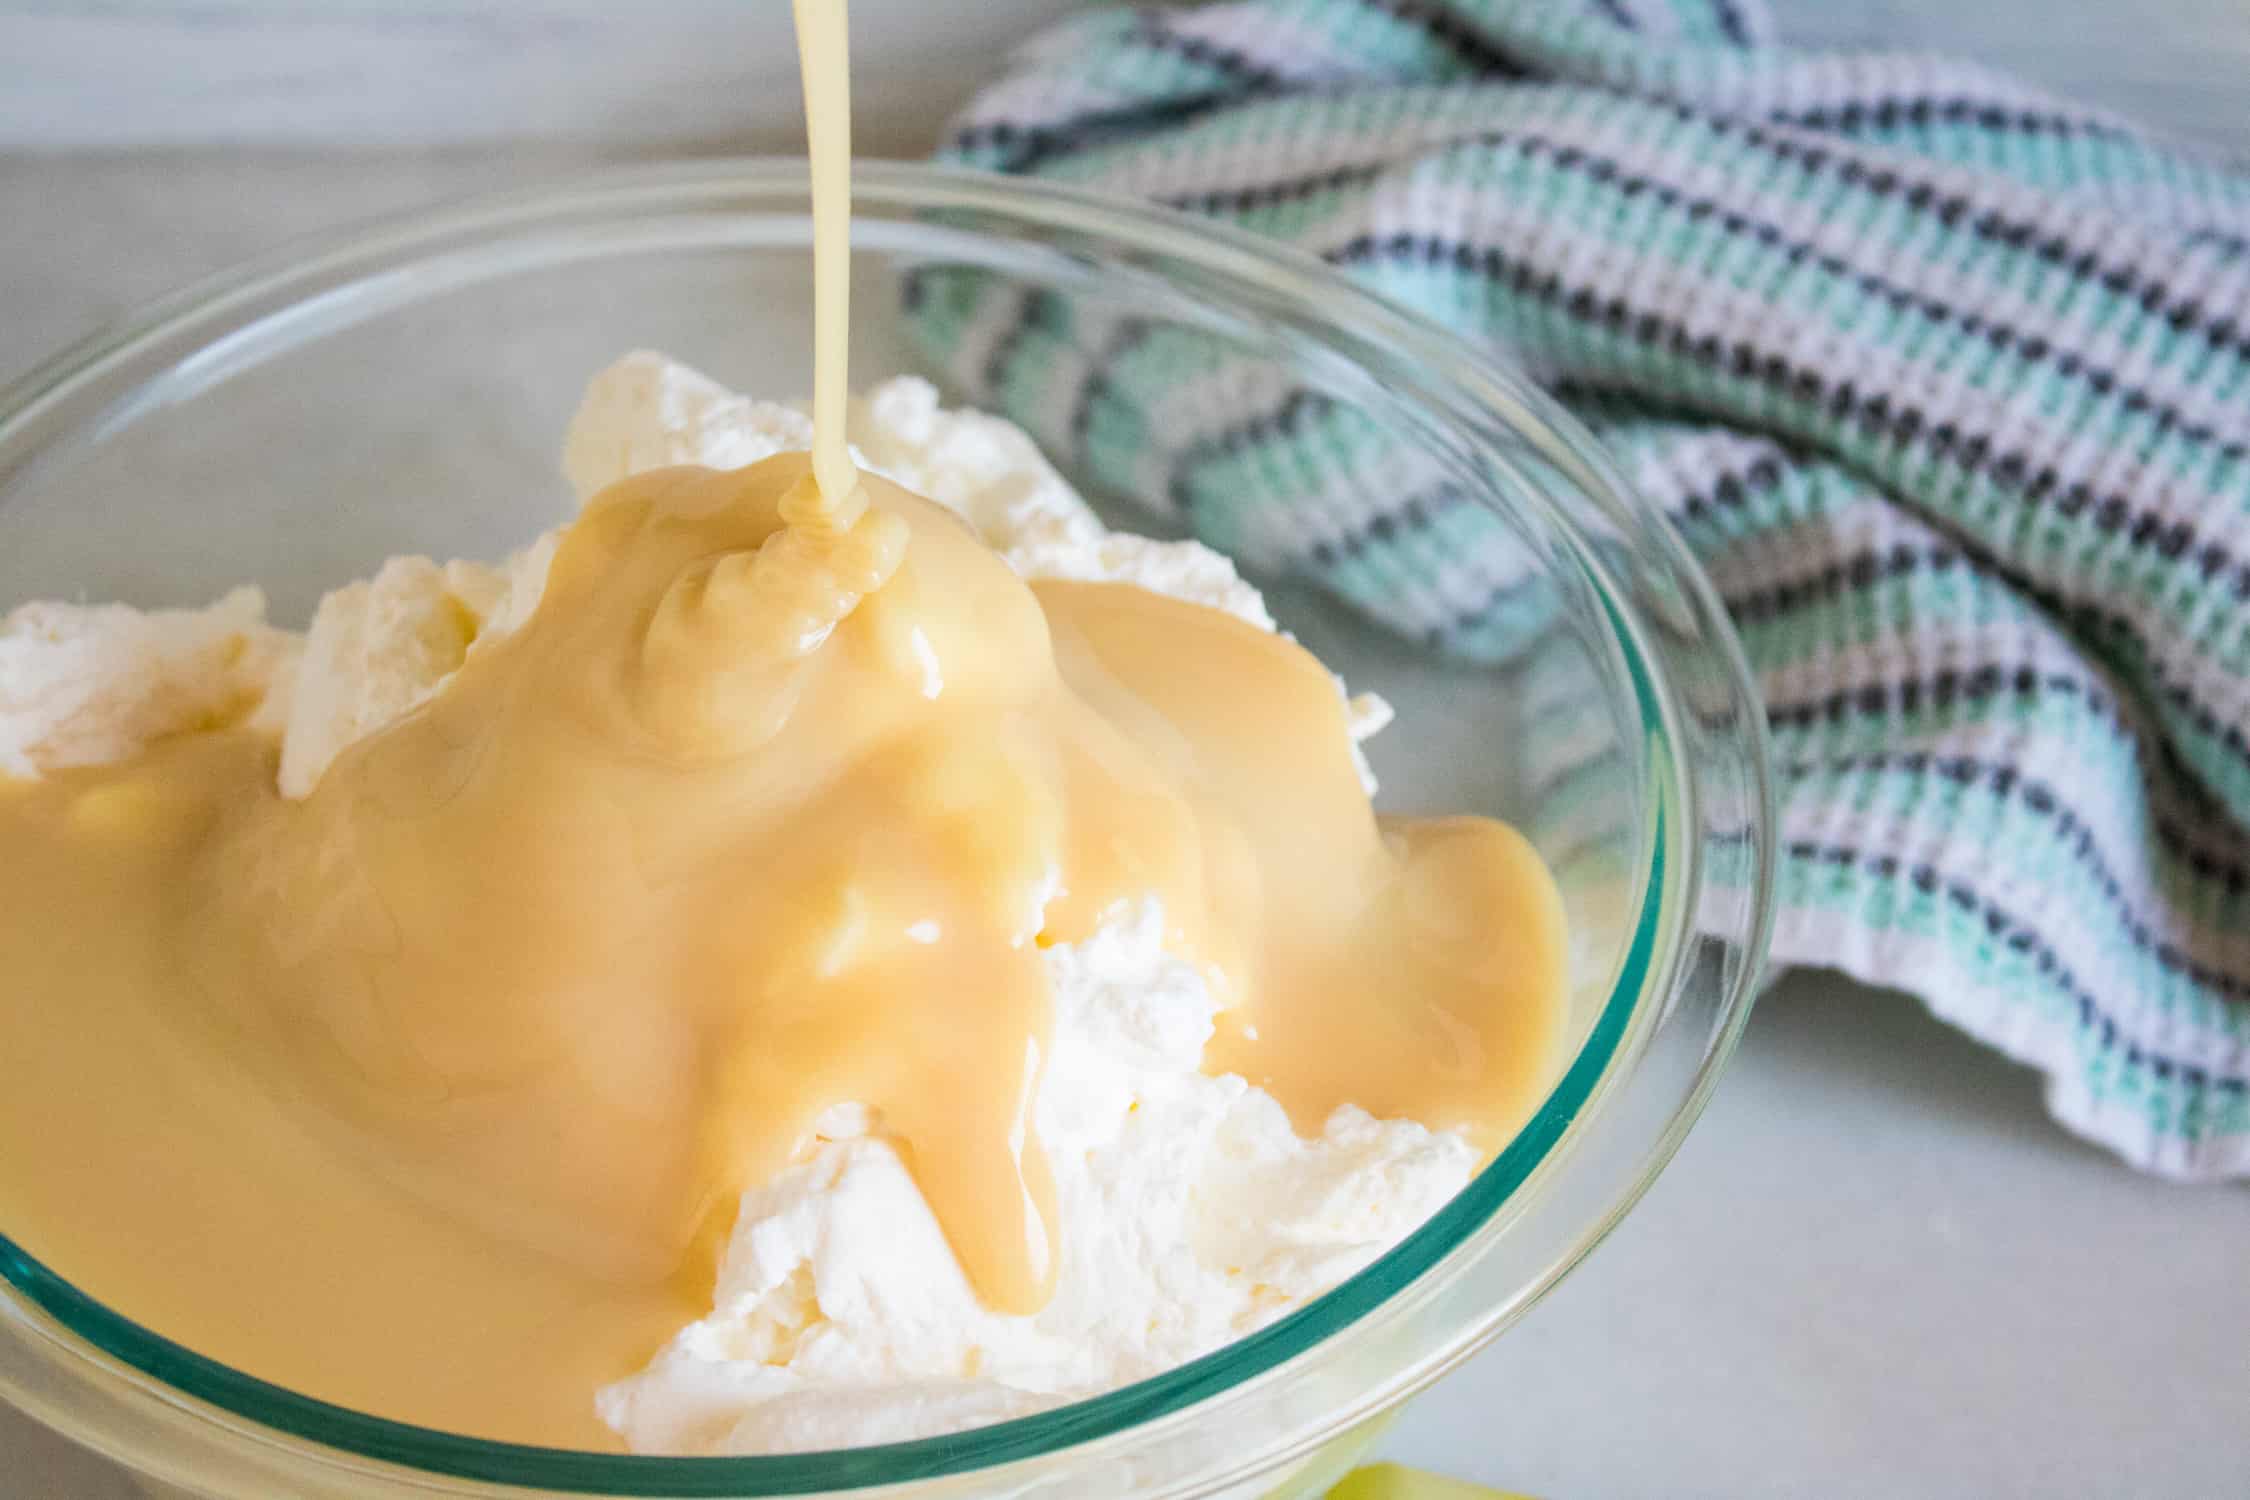 condensed milk being poured on top of the whipped cream inside a clear glass mixing bowl